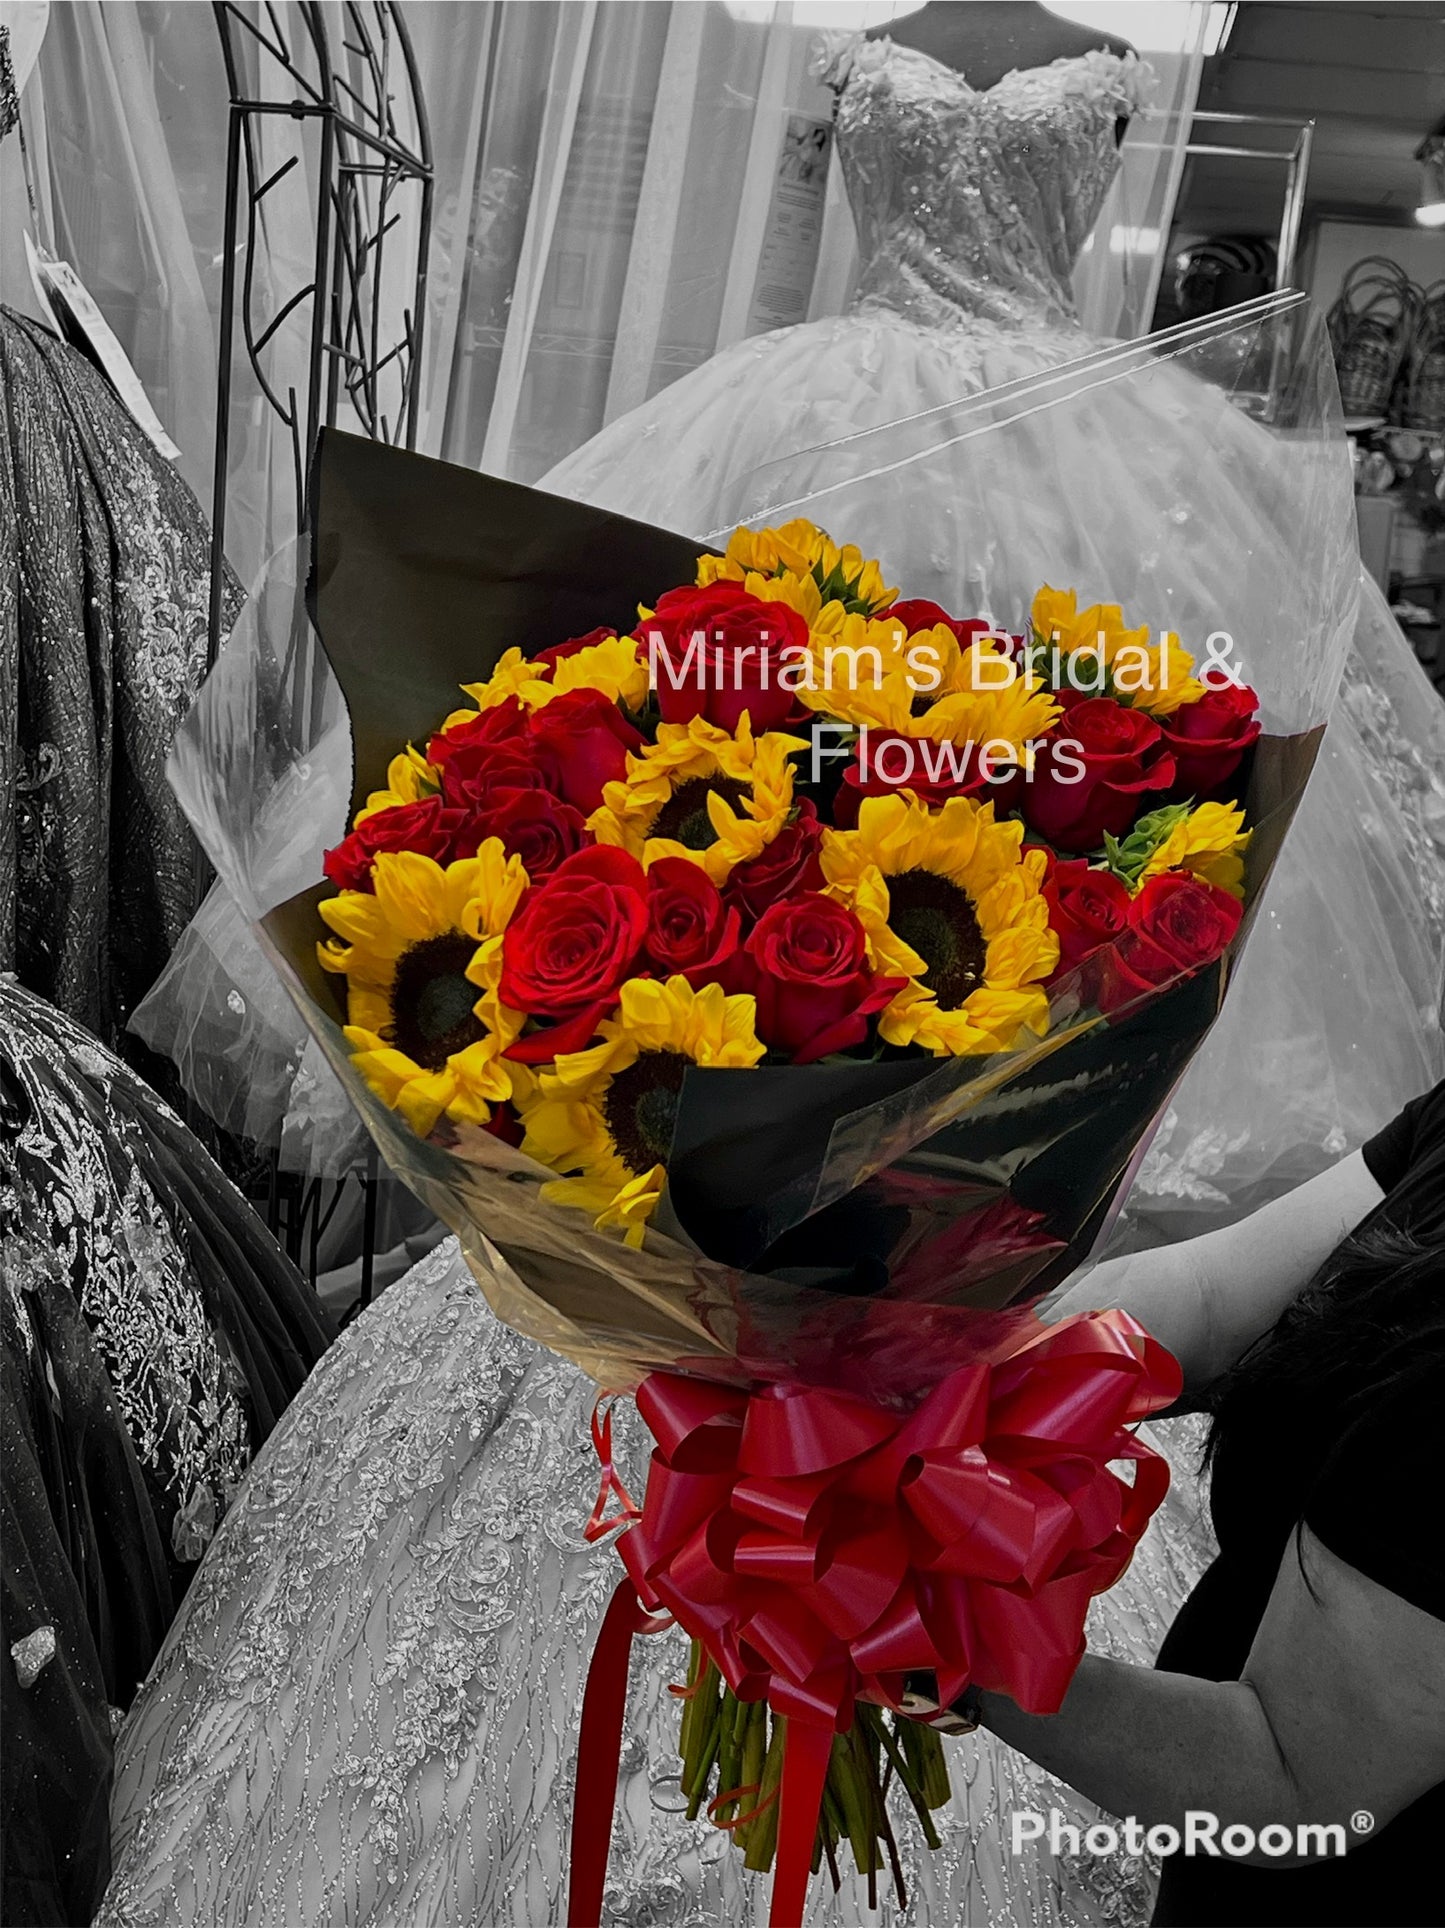 Timeless Roses, Flawless Sunflowers